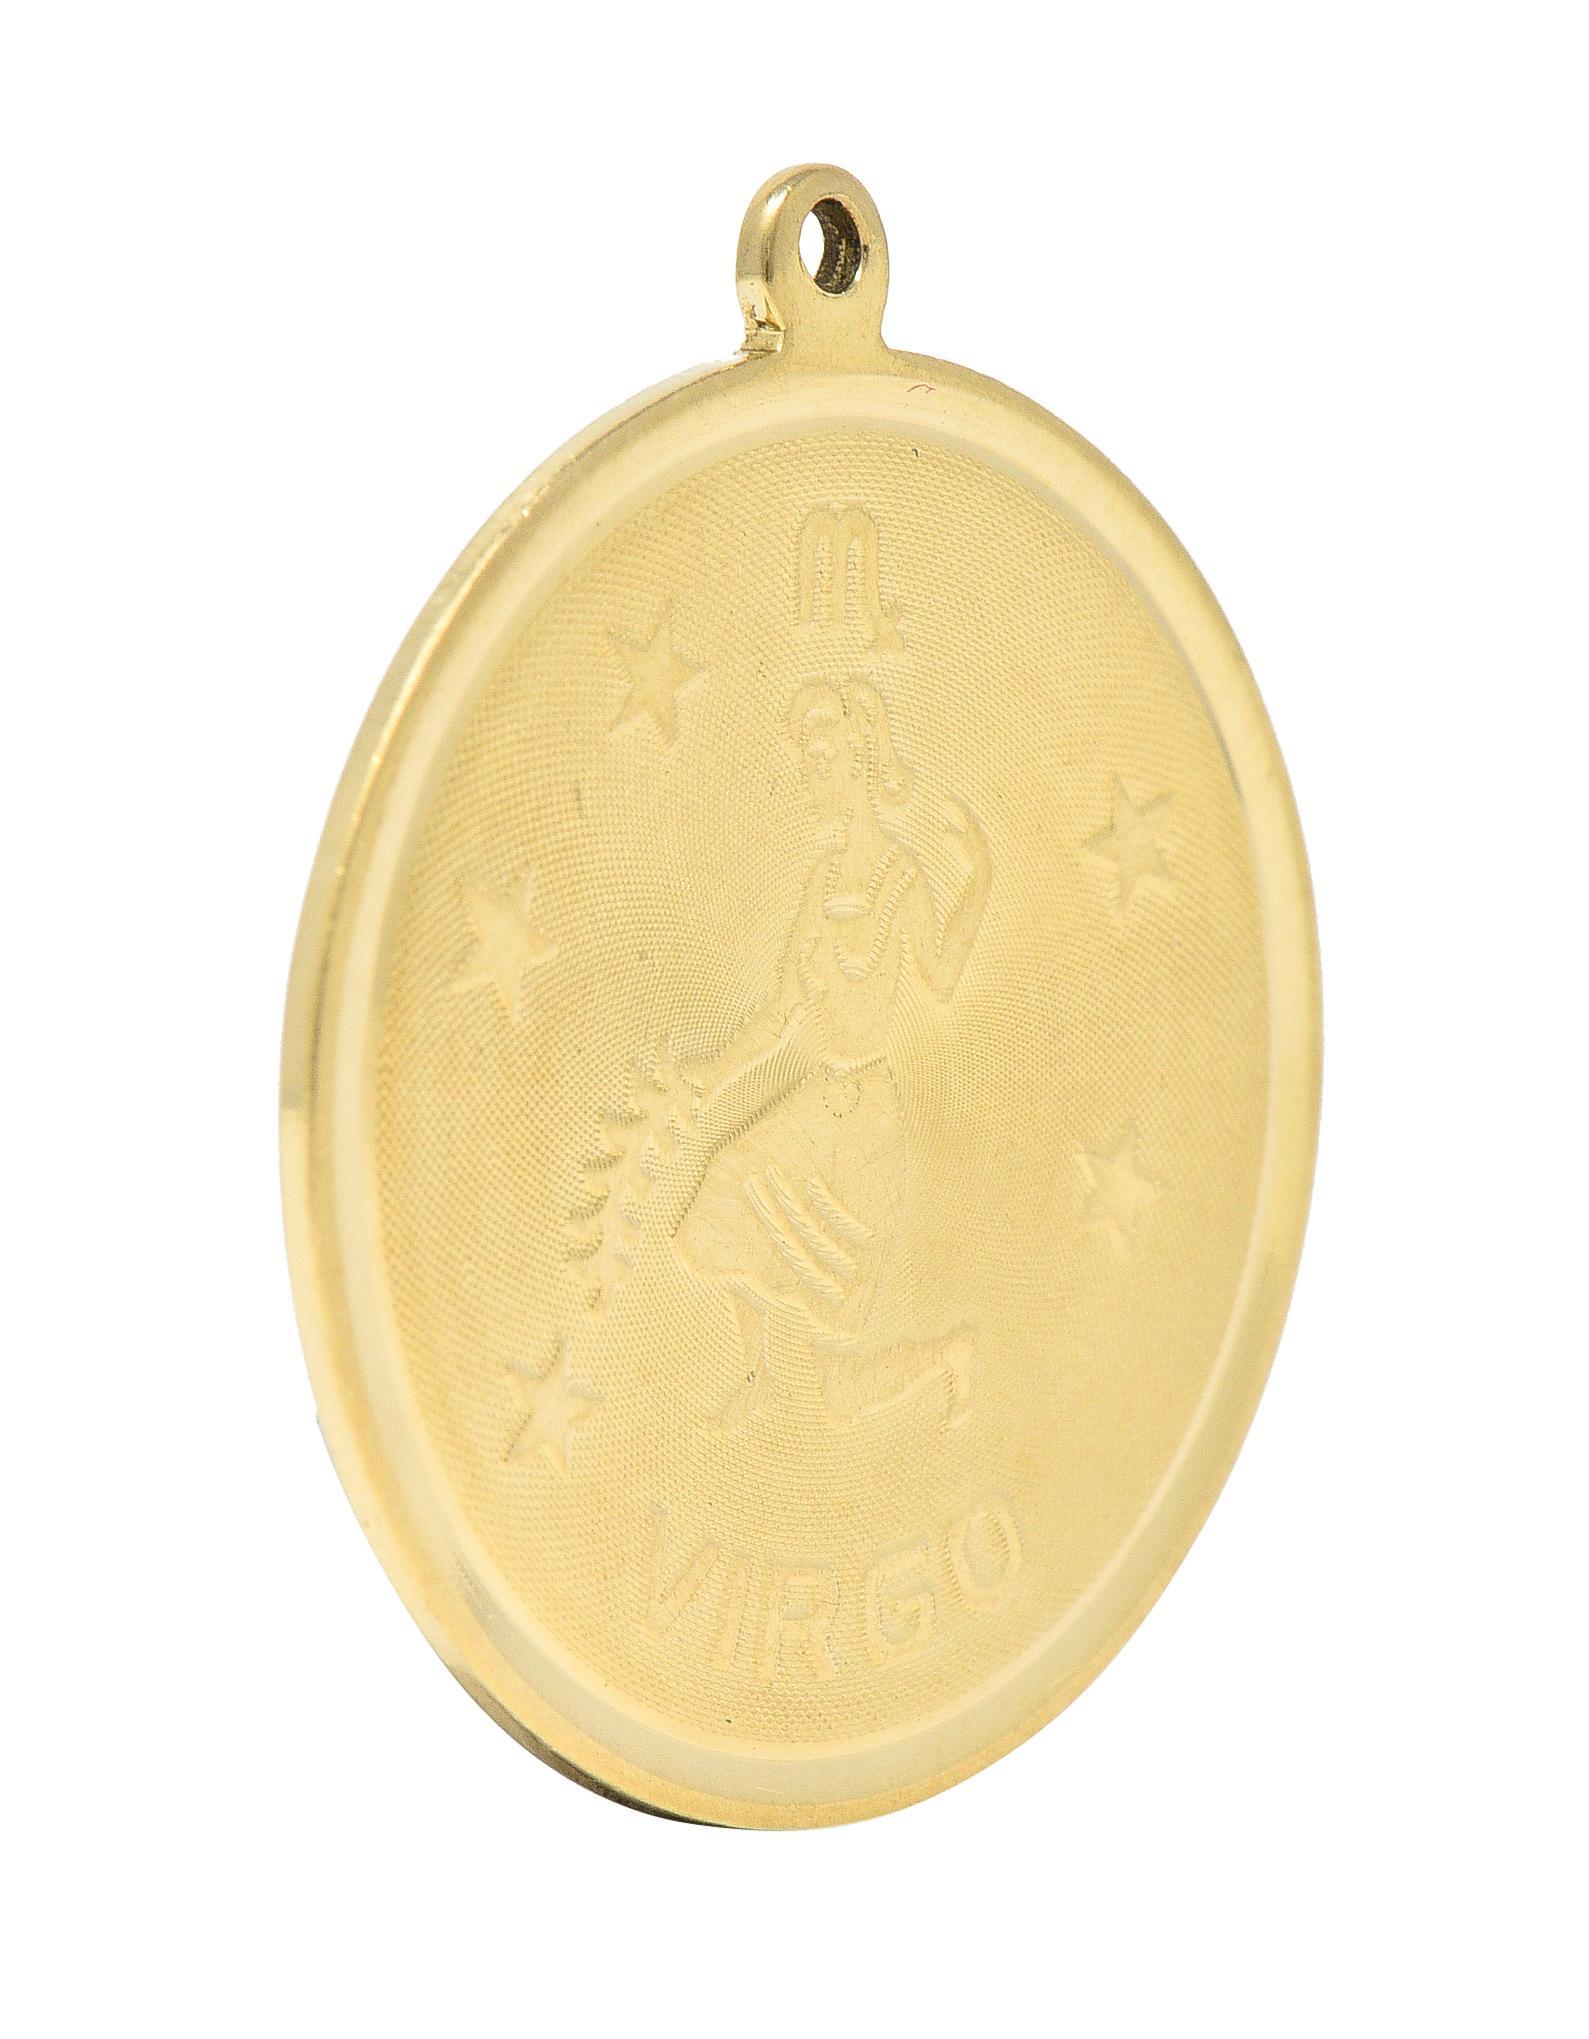 Designed as a round disk with high polished edges and a raised Virgo zodiac motif
With the astrological Virgo symbol, a woman holding wheat, stars, and inscribed 'VIRGO'
With a finely cross-hatch textured recess
Completed by pierced bale
Tested as